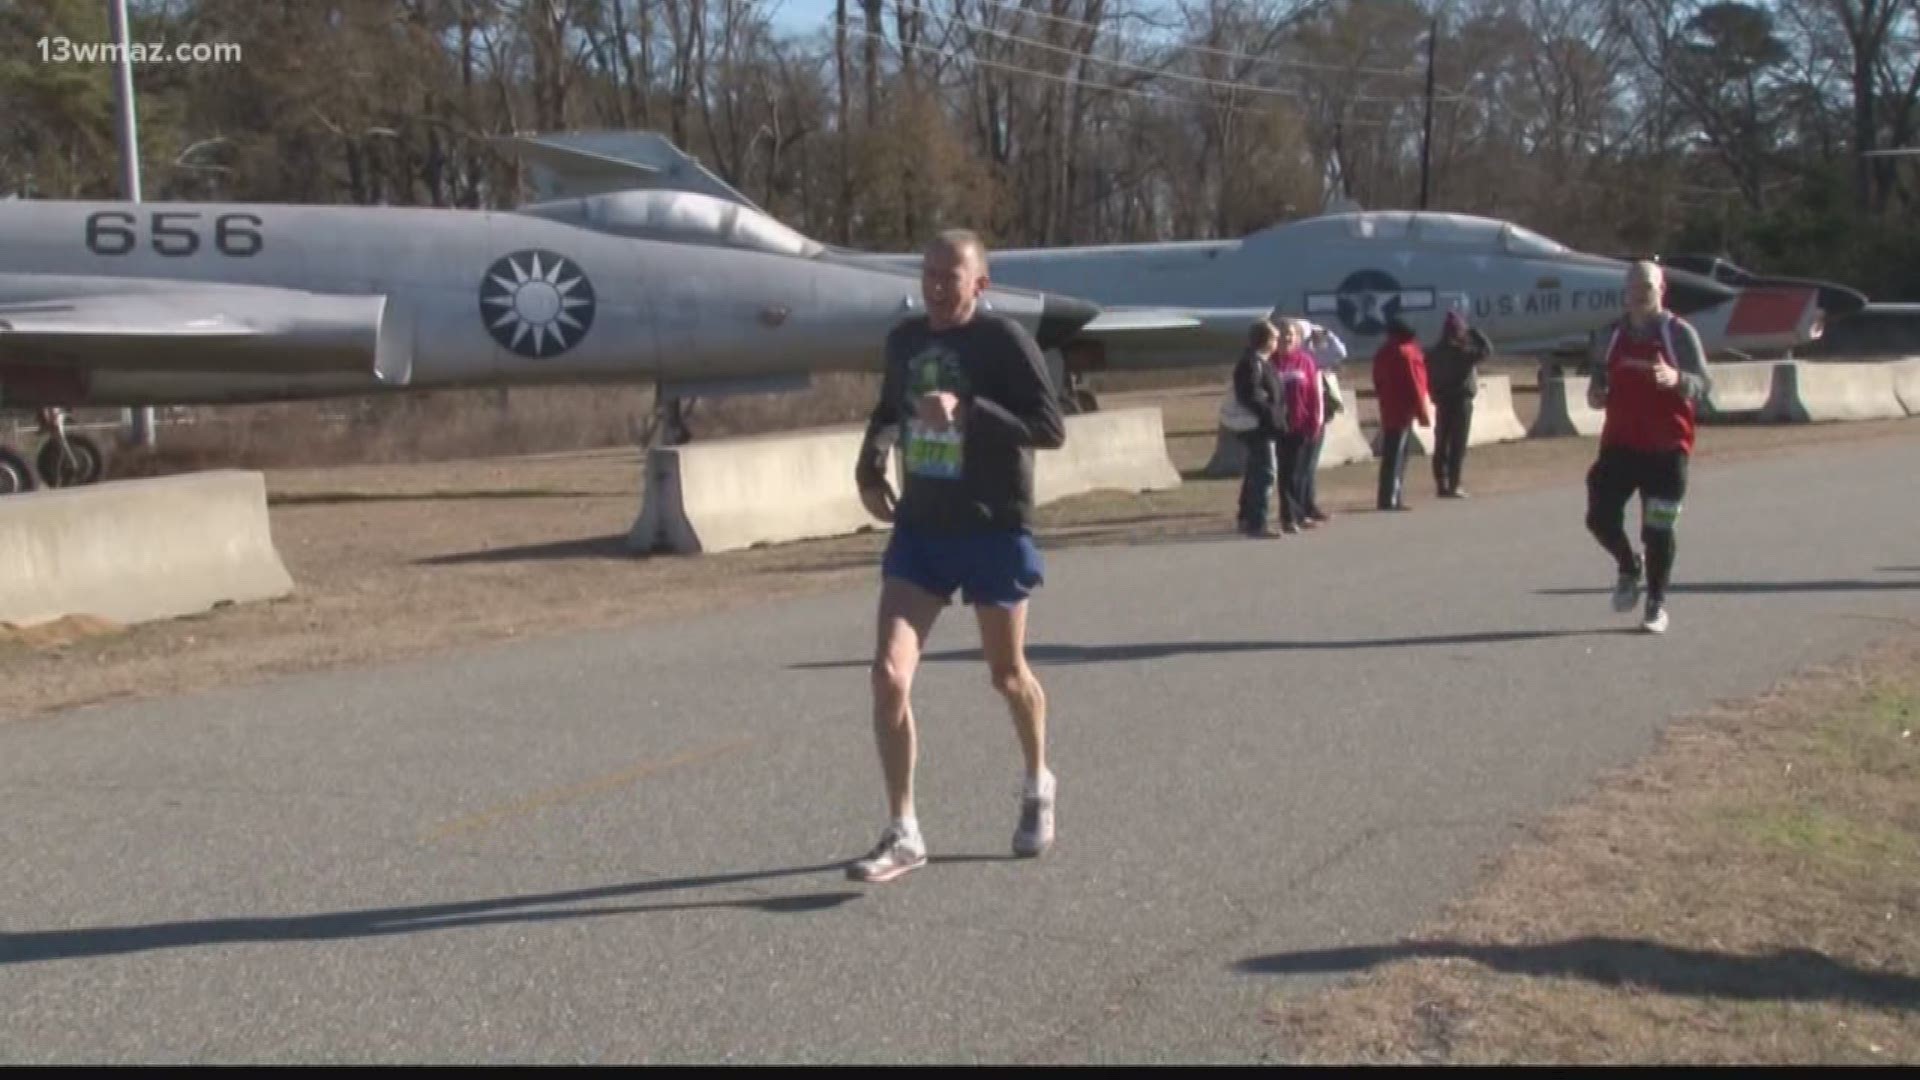 This weekend, you can stay on track with that New Year resolution of getting healthier by pounding the pavement in the 24th annual Run for Aviation Marathon.